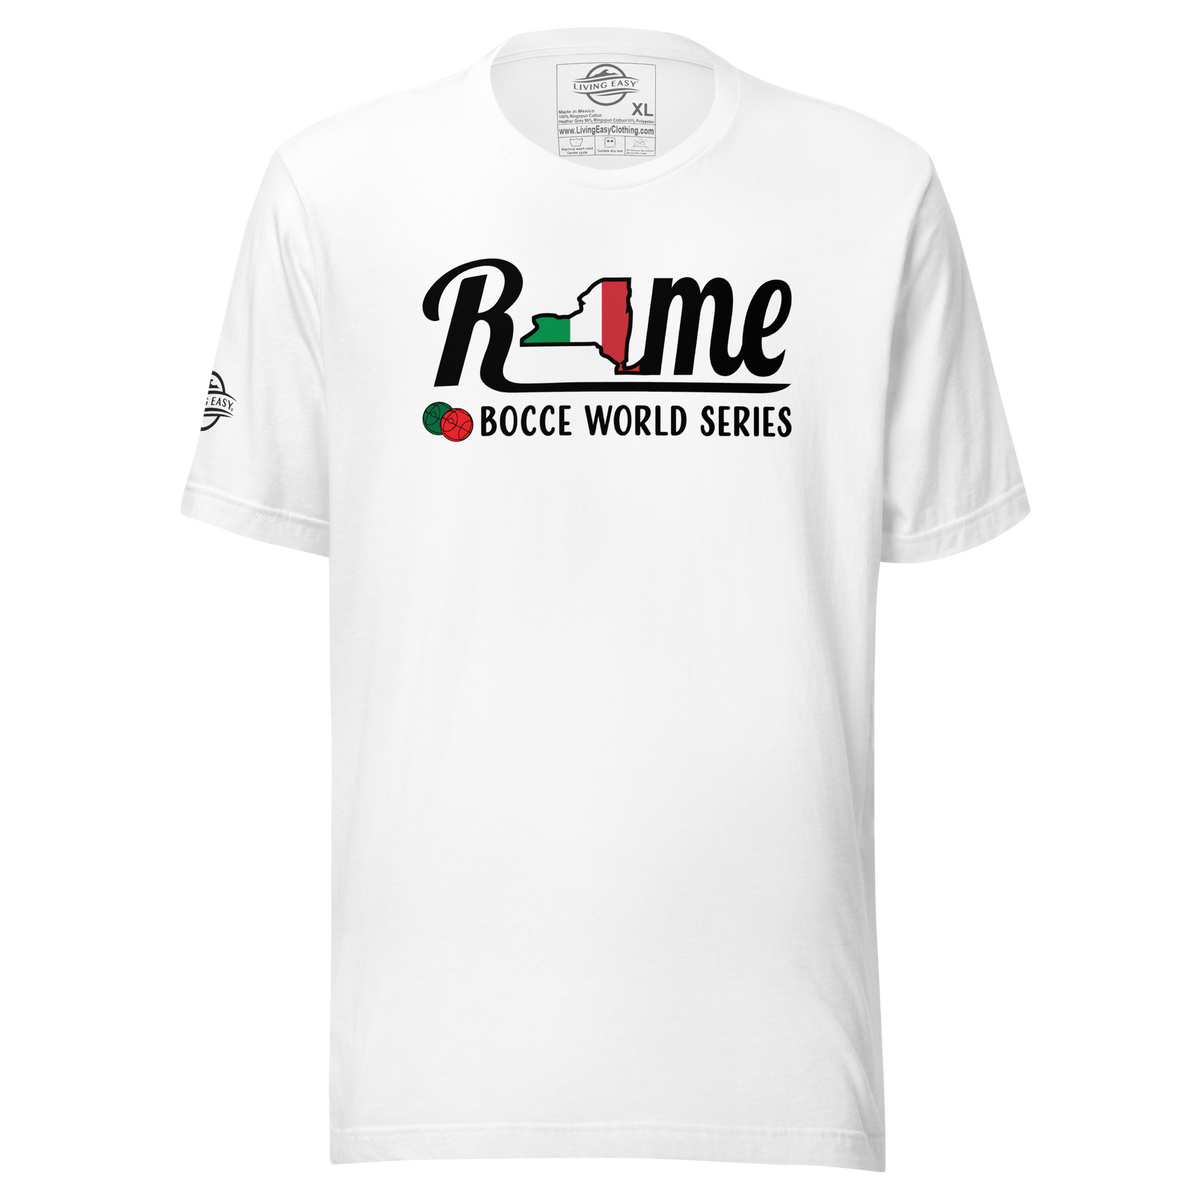 Rome Bocce World Series Tee | Official Living Easy Brand 2XL / Black